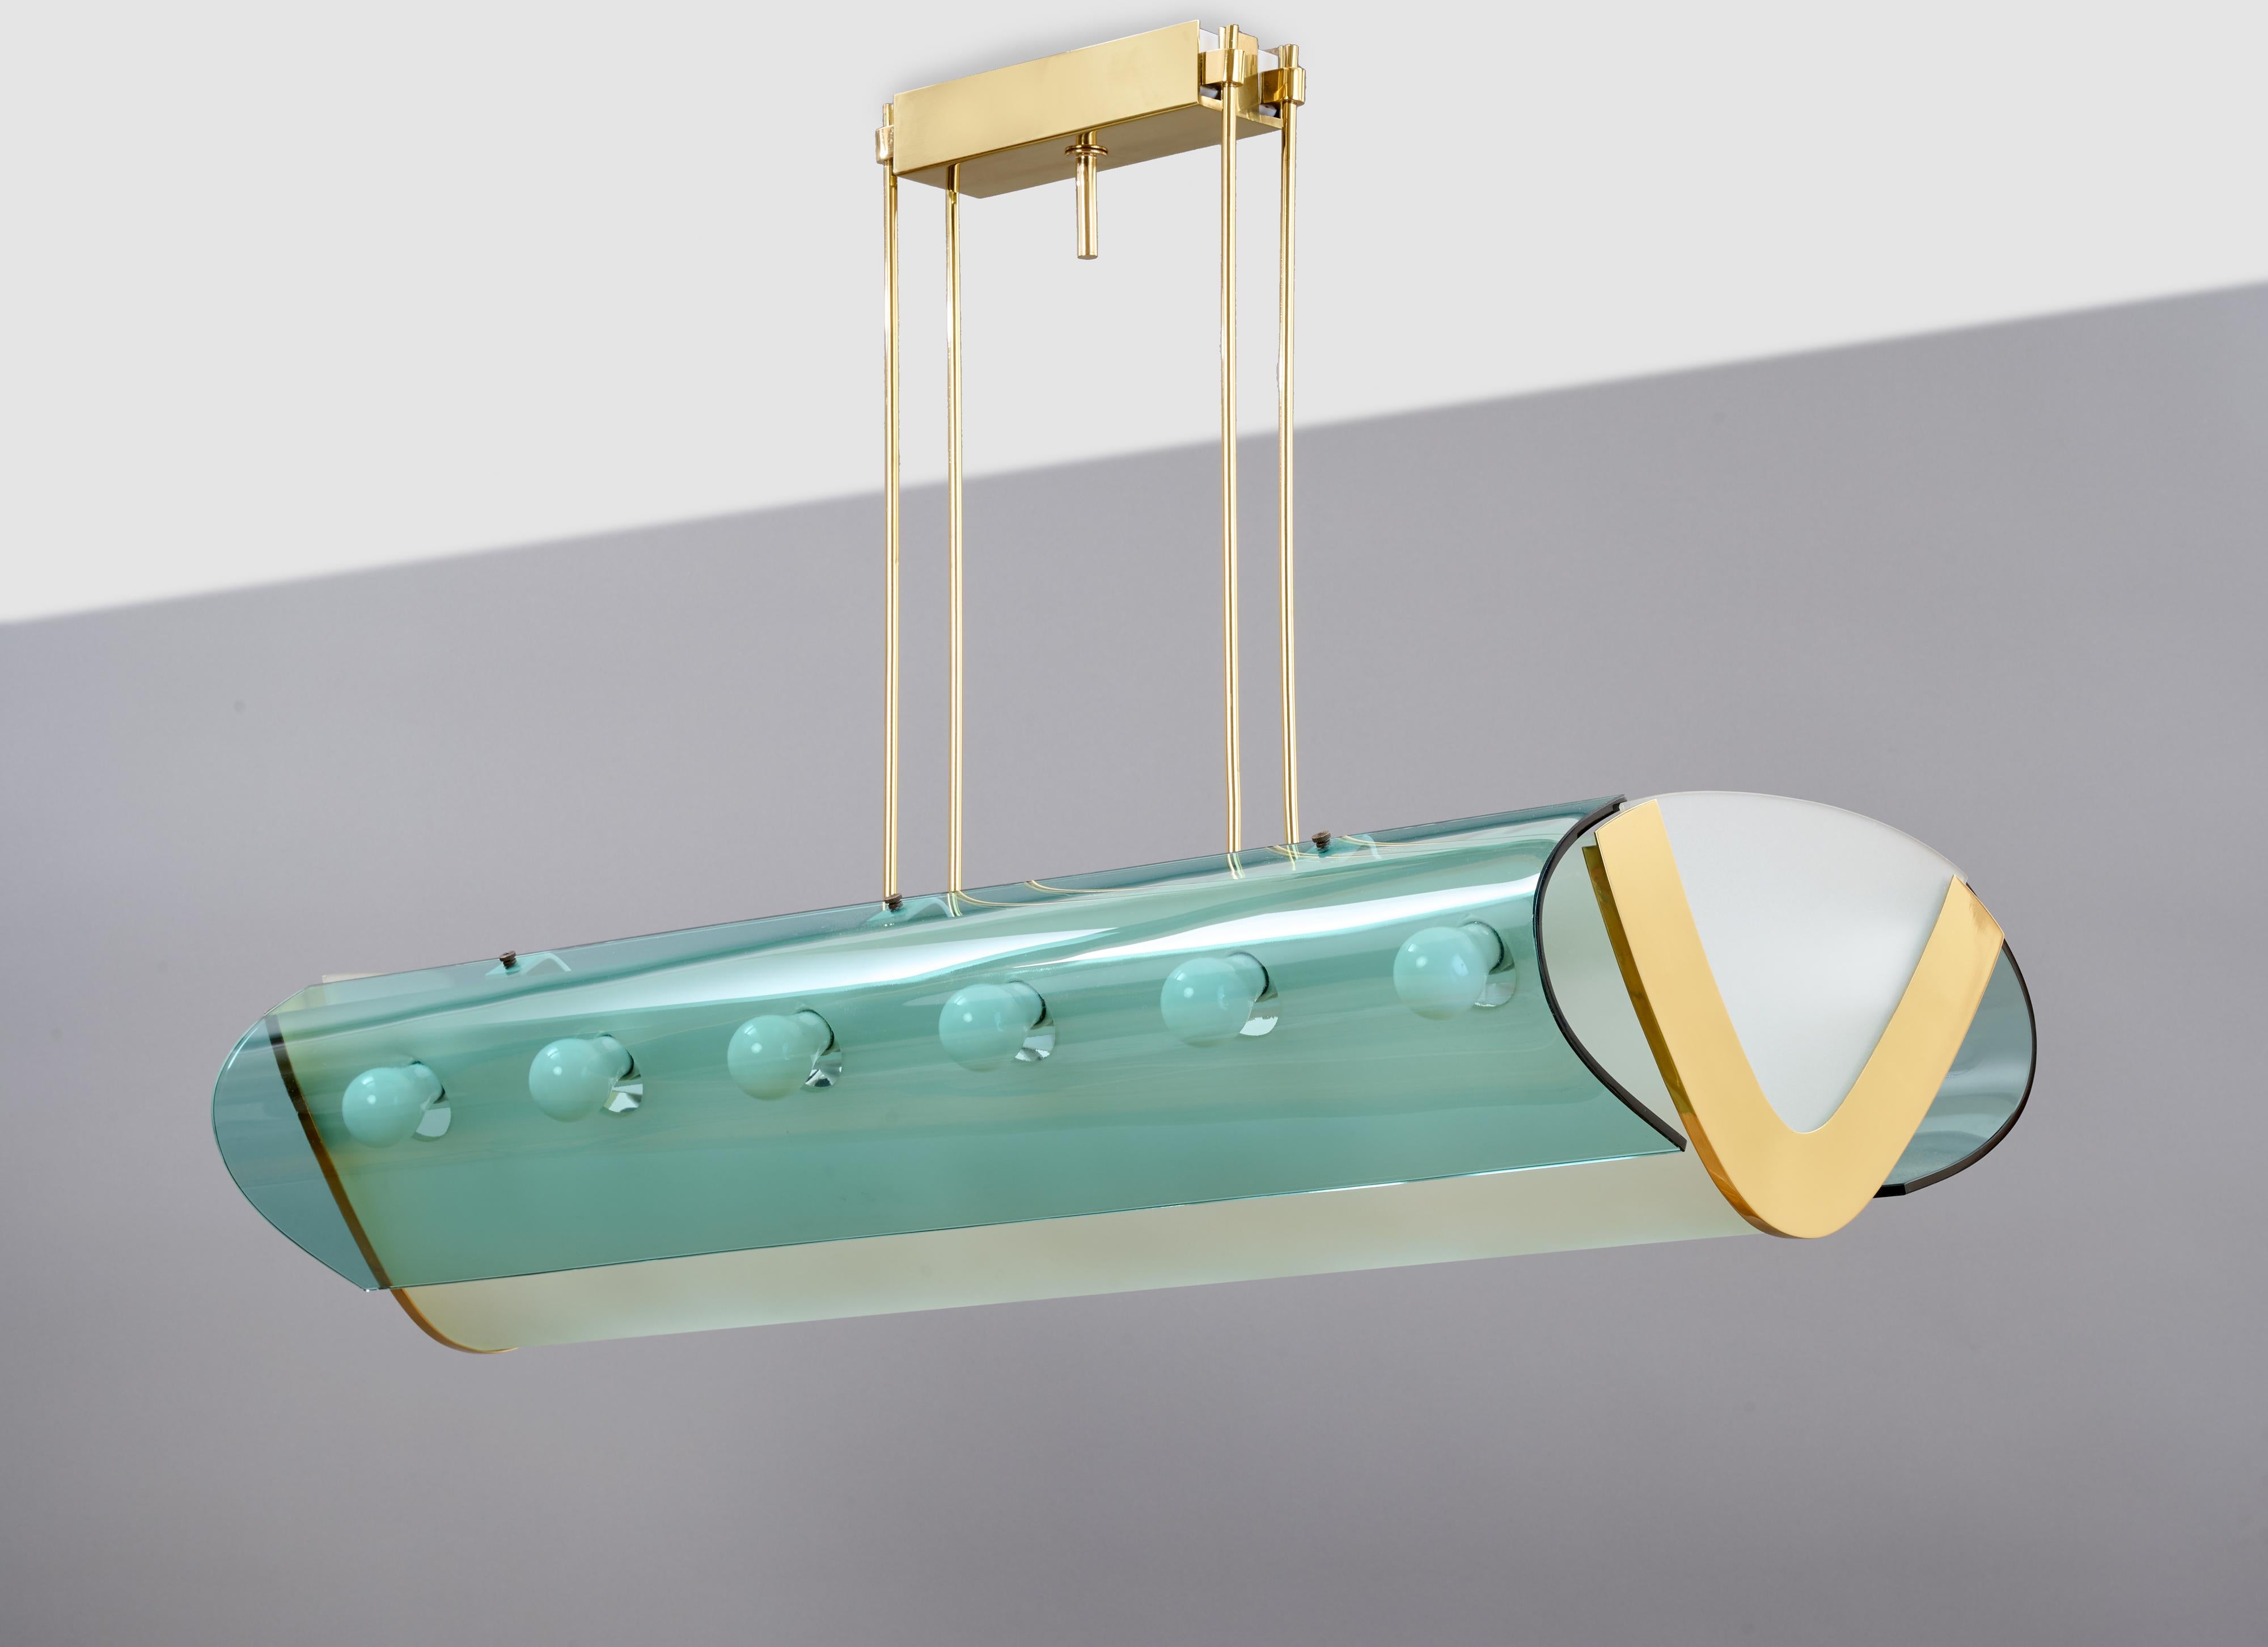 Max Ingrand (1908 - 1969) for Fontana Arte

A large and important 18-bulb pendant chandelier by Max Ingrand for Fontana Arte, oblong in shape; in frosted, clear, and colored glass with mirror-polished brass mounts. A long V-shaped body with a